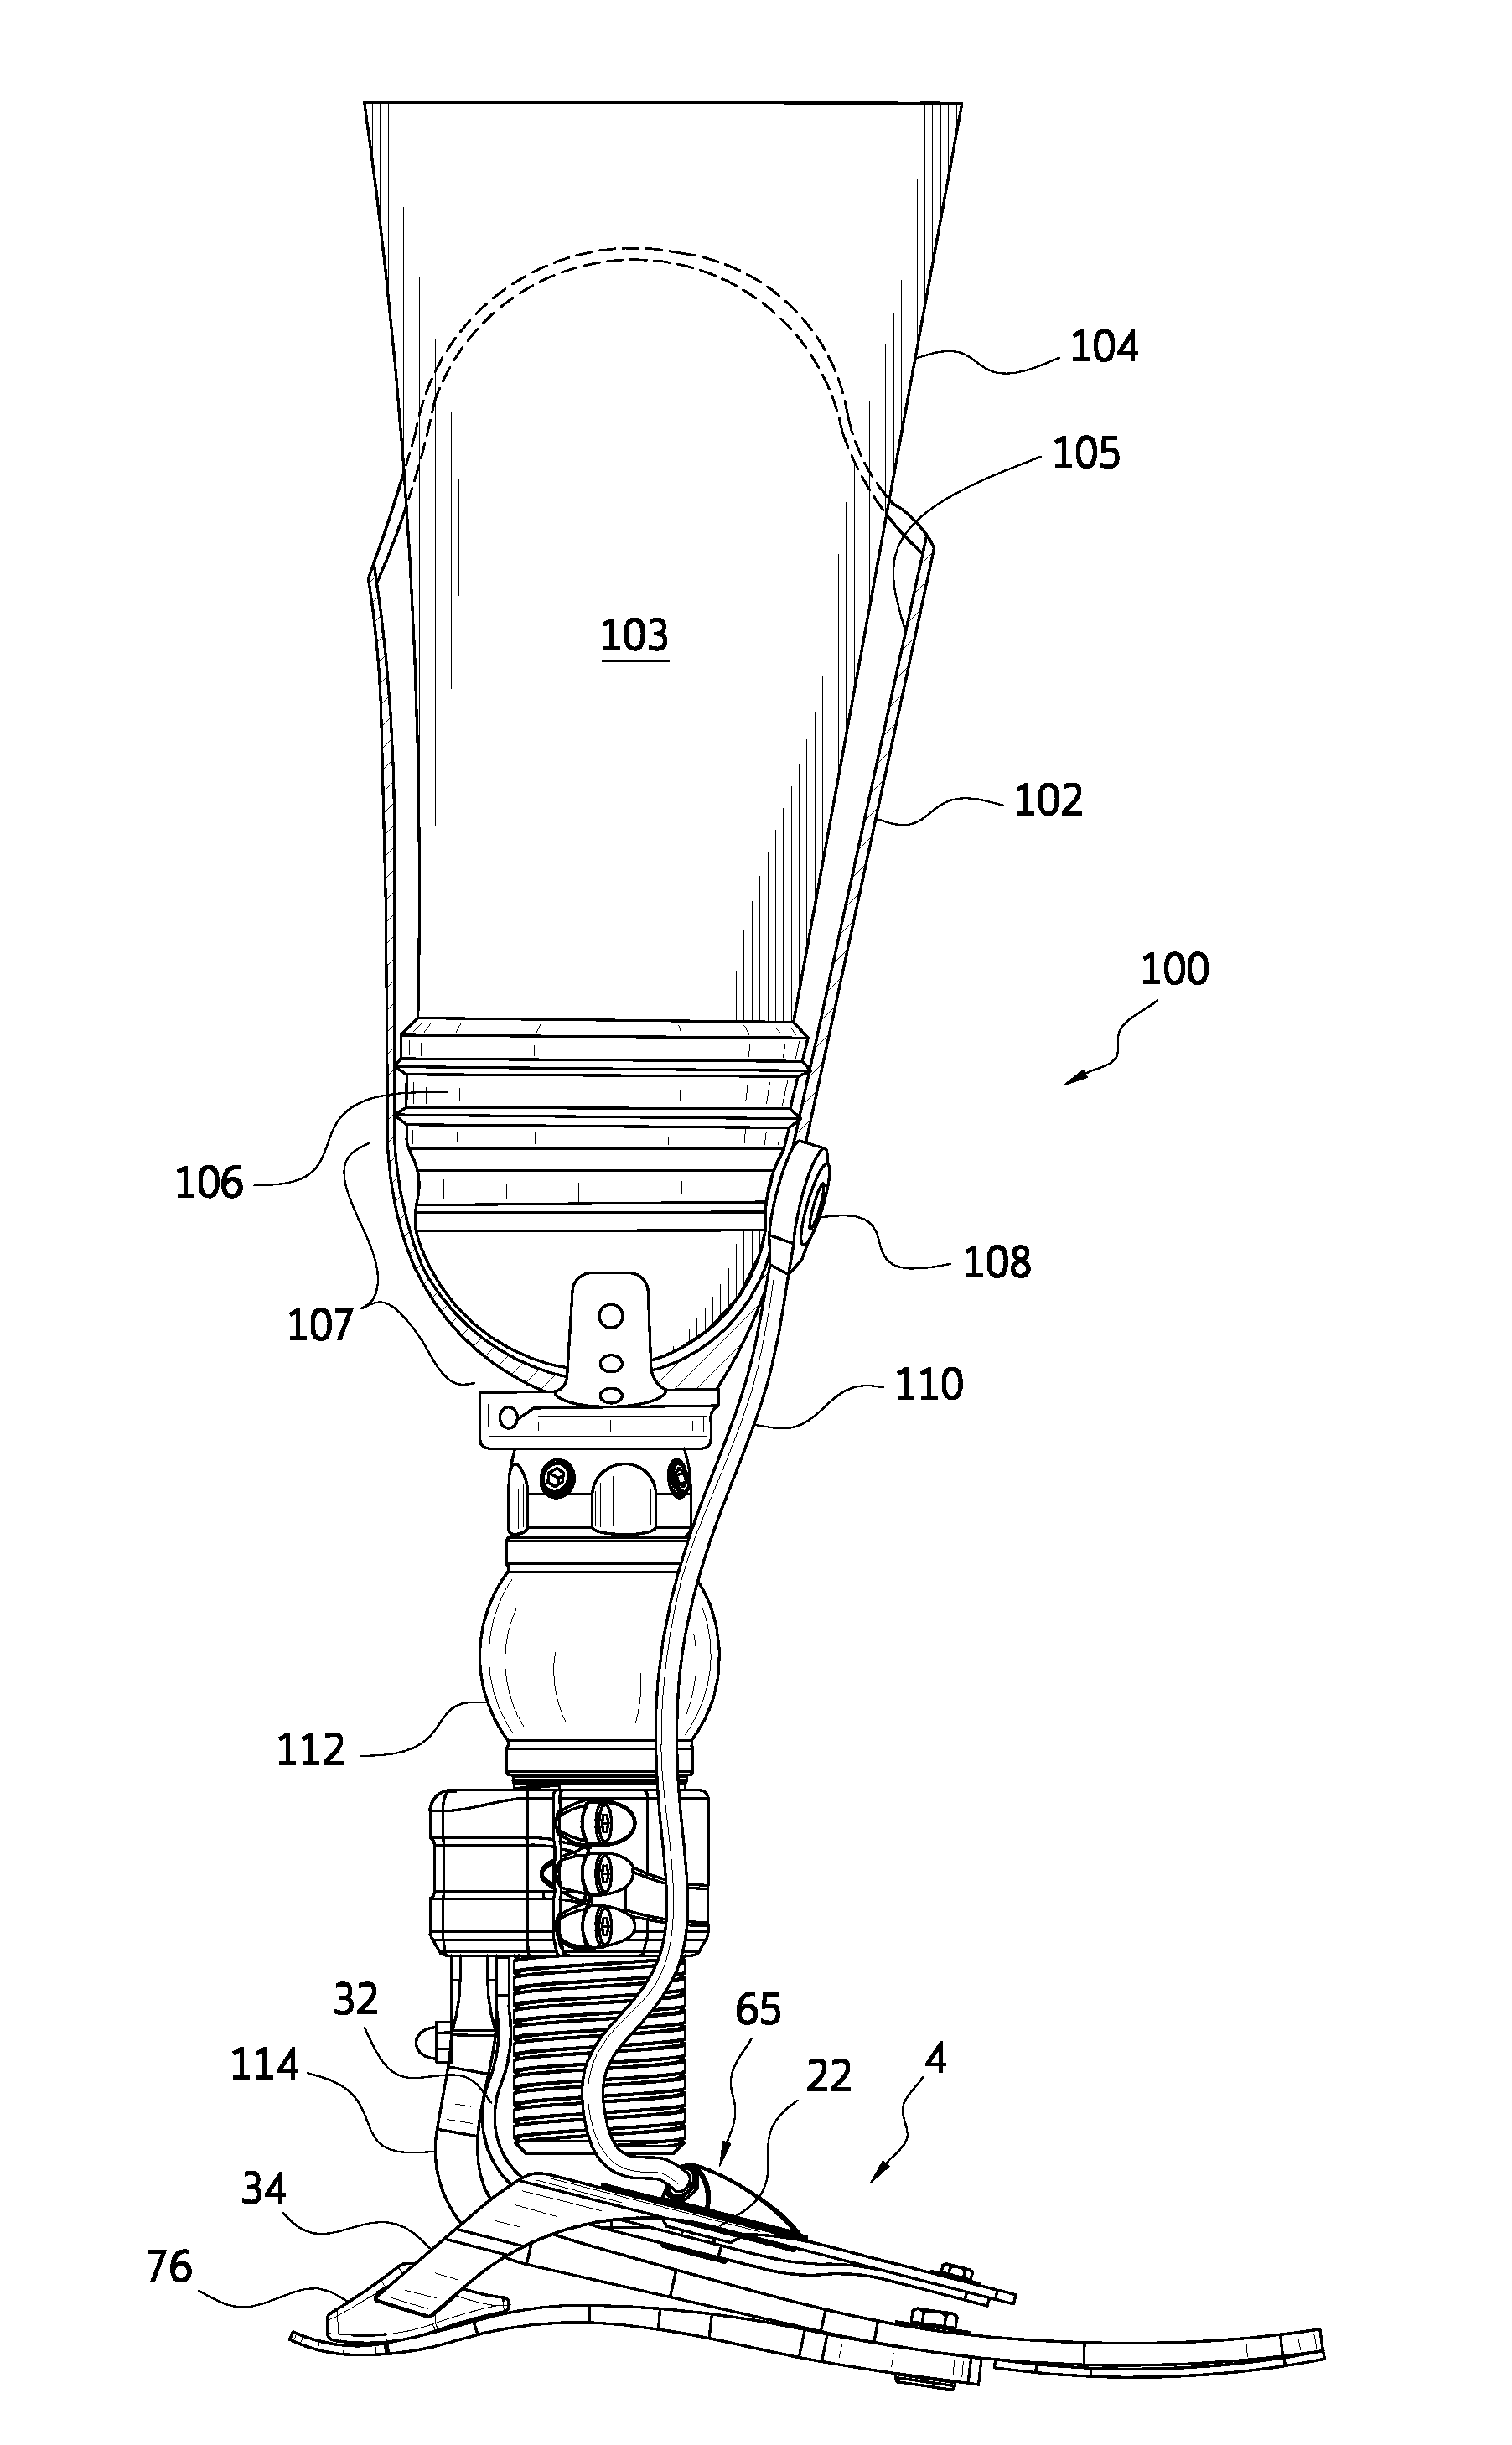 Prosthetic device, system and method for increasing vacuum attachment